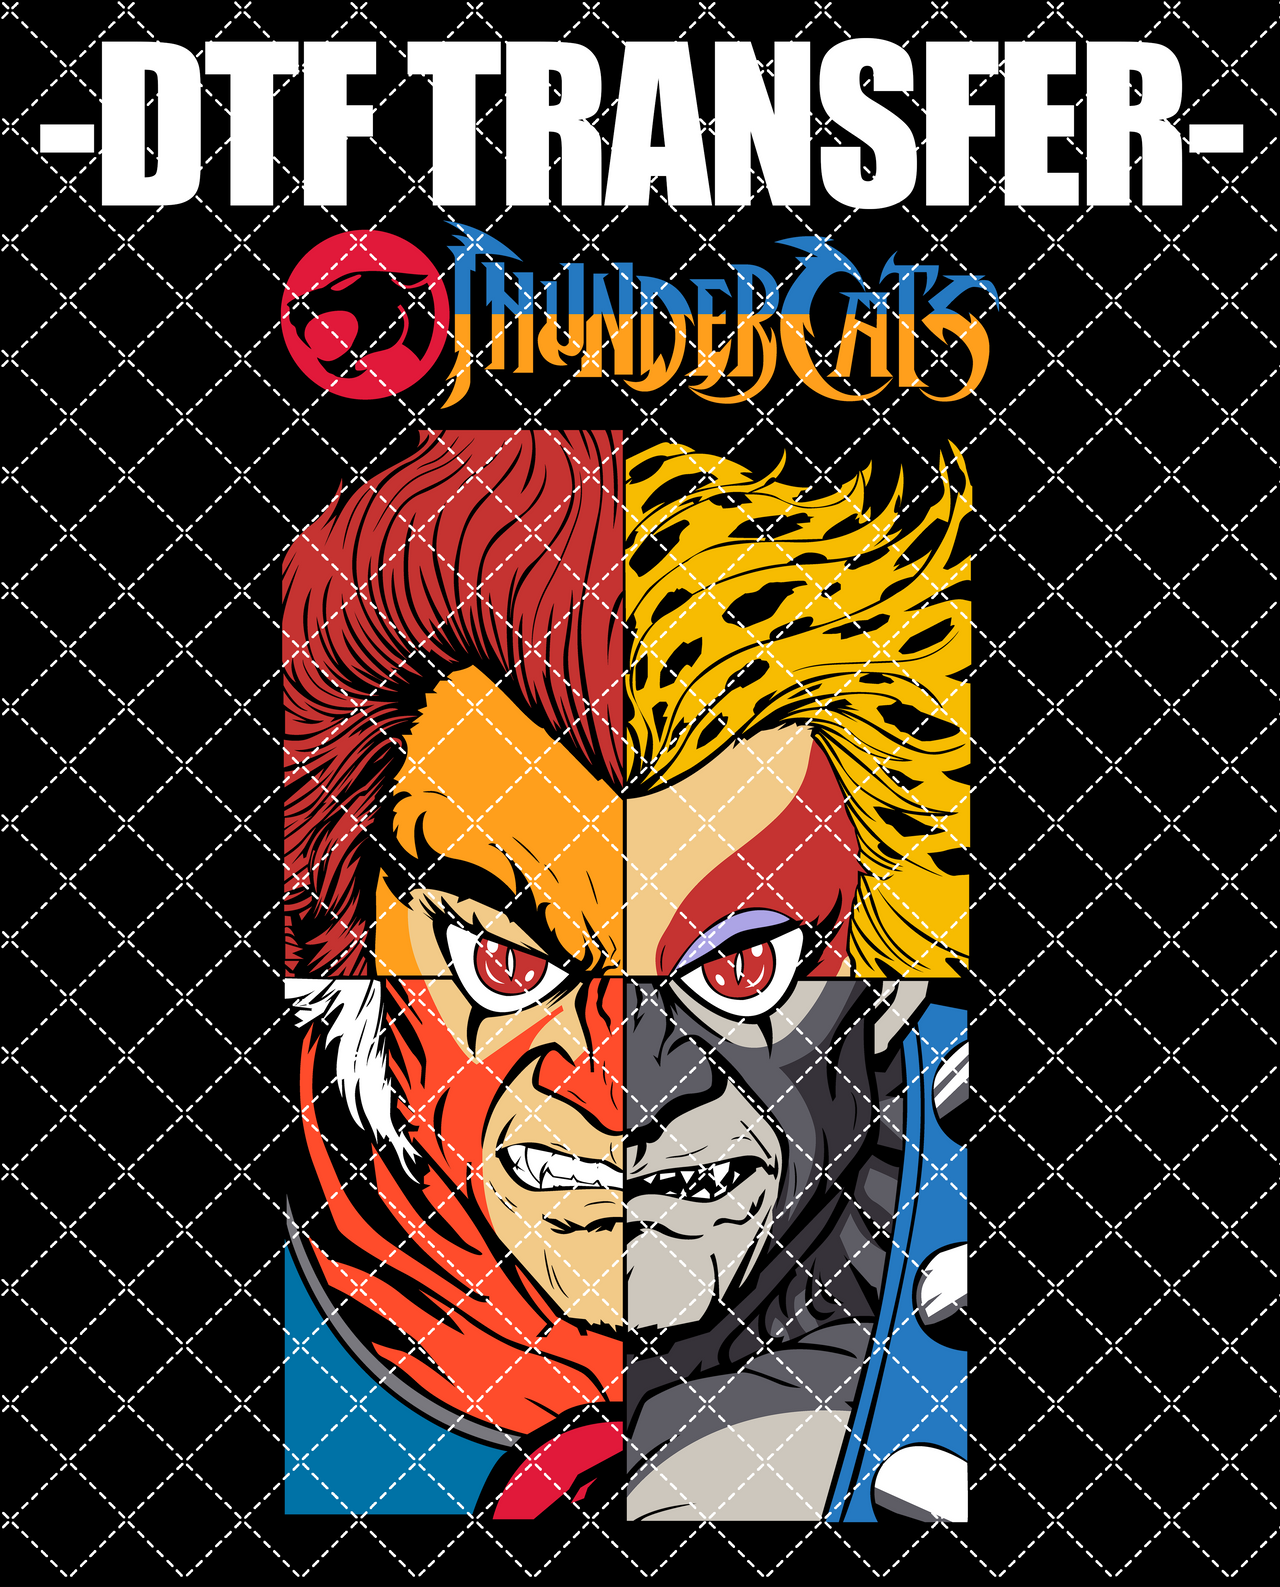 Thundercats Characters (For Black Tee) - DTF Transfer (Ready To Press)